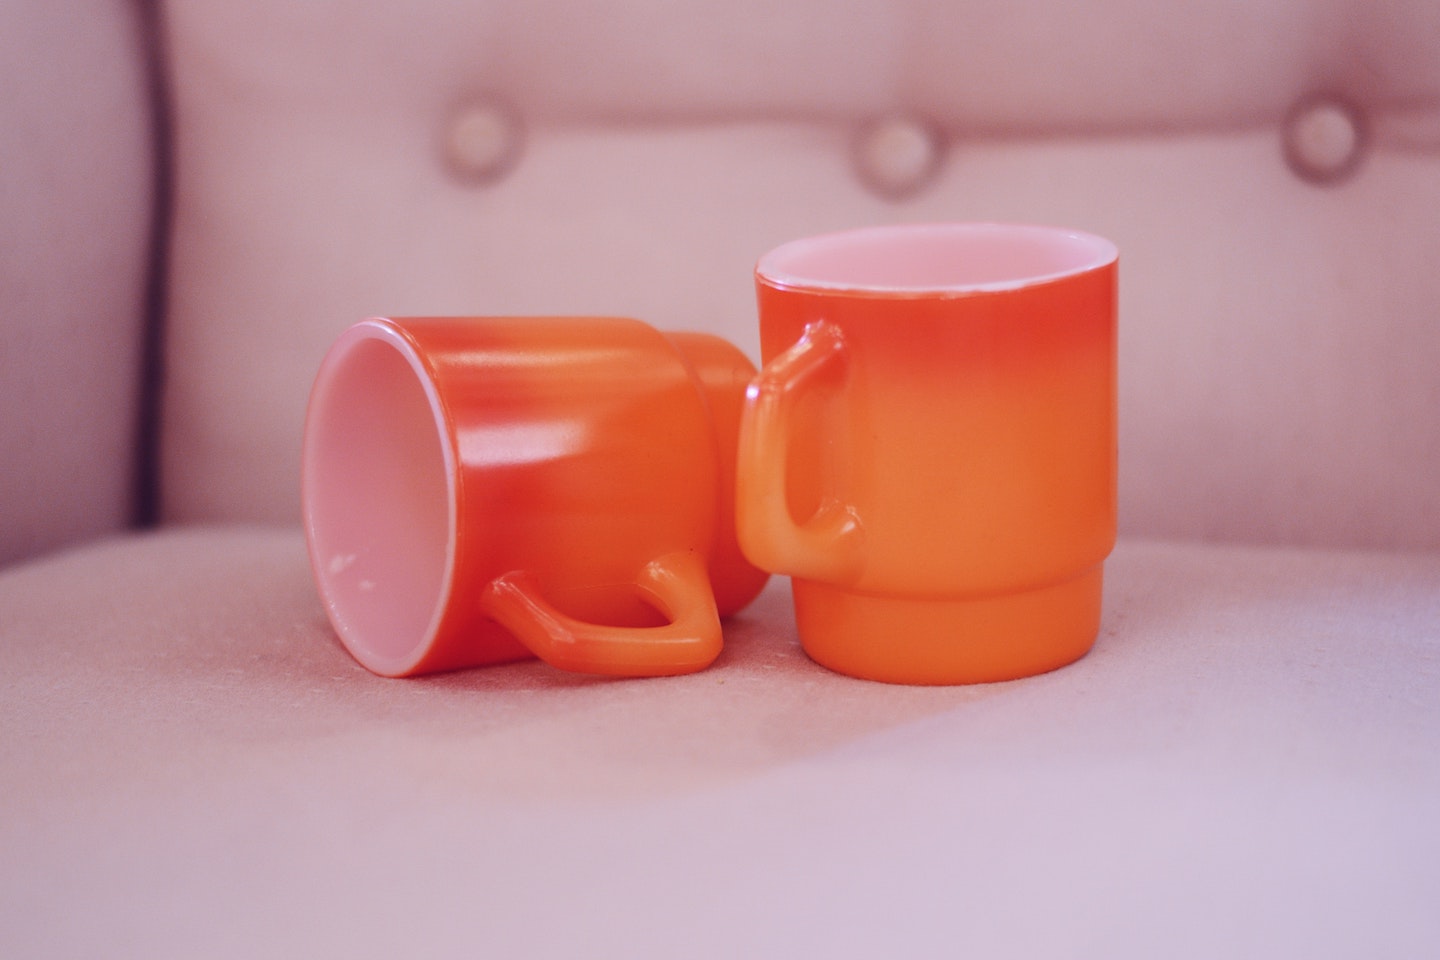 Two empty orange mugs are seen on a chair. One is laying sideways.